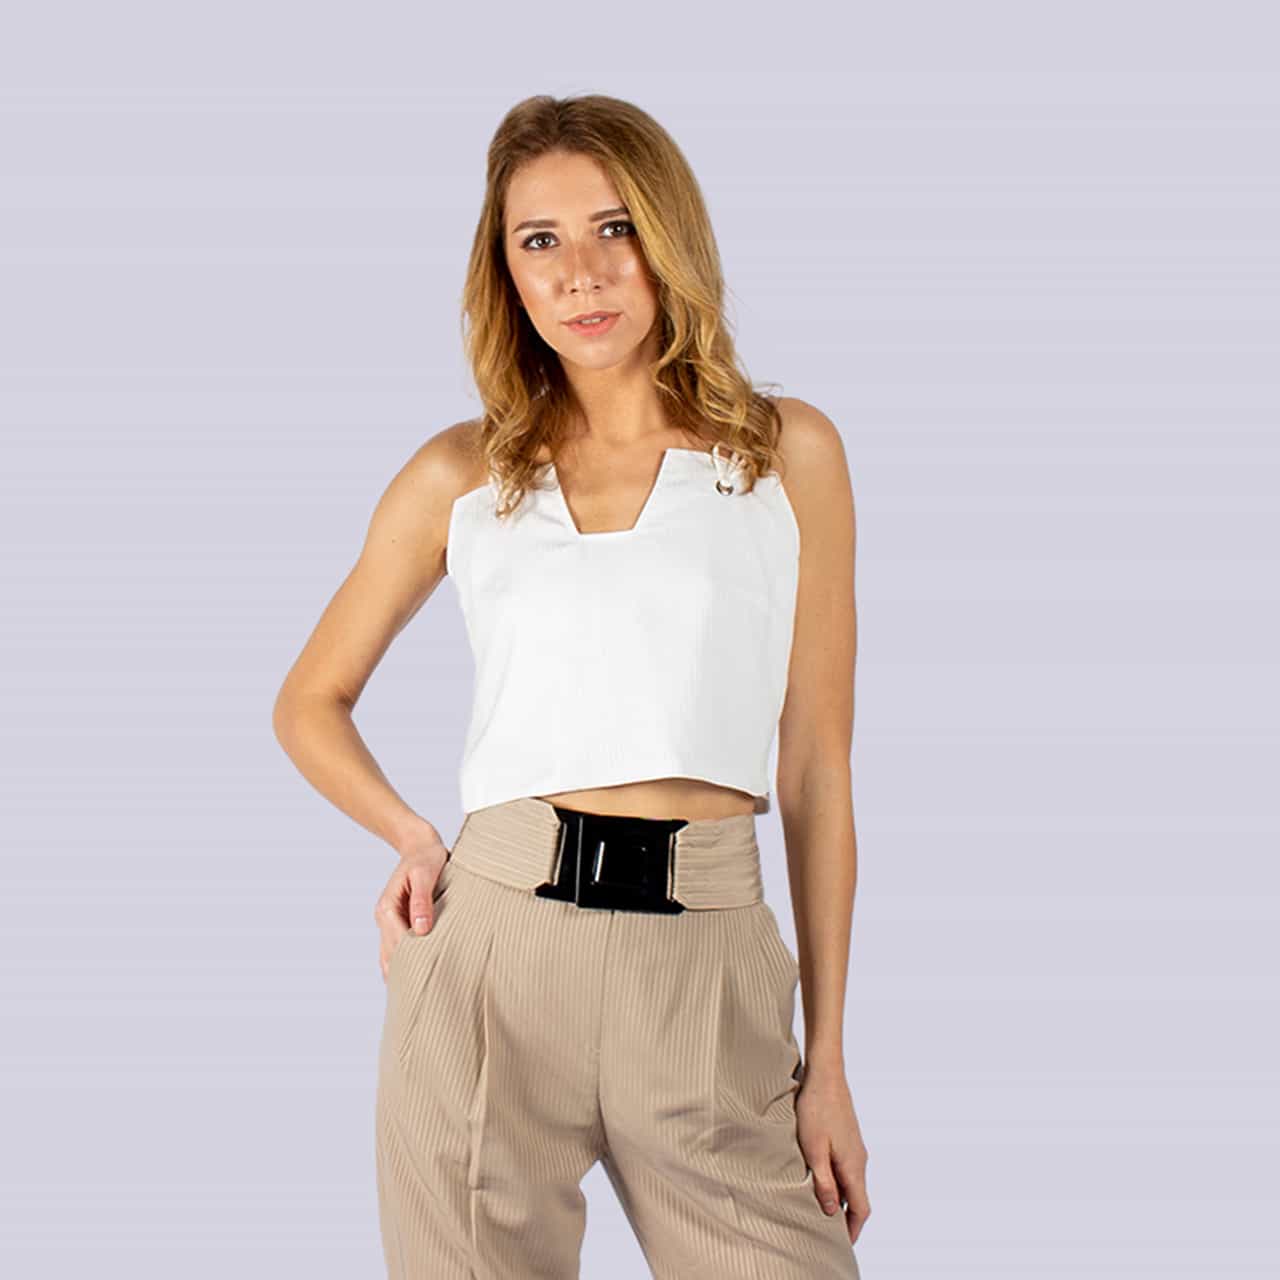 Buy High Waisted Pants for Women, Regular Fit Pants Women, High Rise  Trousers for Women, Office and Formal Pants for Women Online in India - Etsy